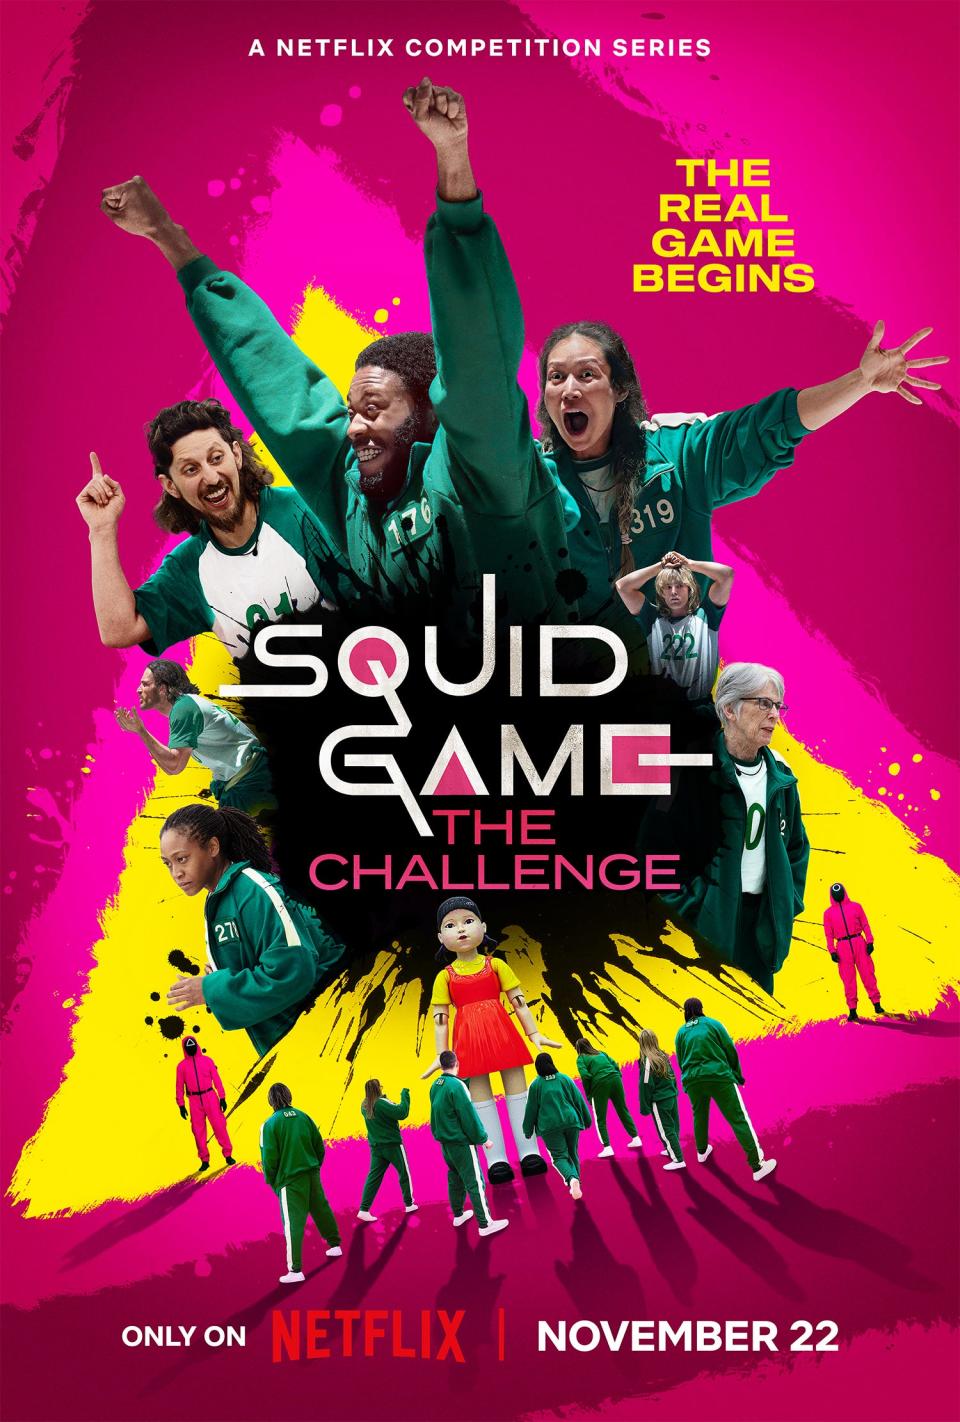 "Squid Game: The Challenge," a reality competition series based on the hit show, is coming to Netflix this November.